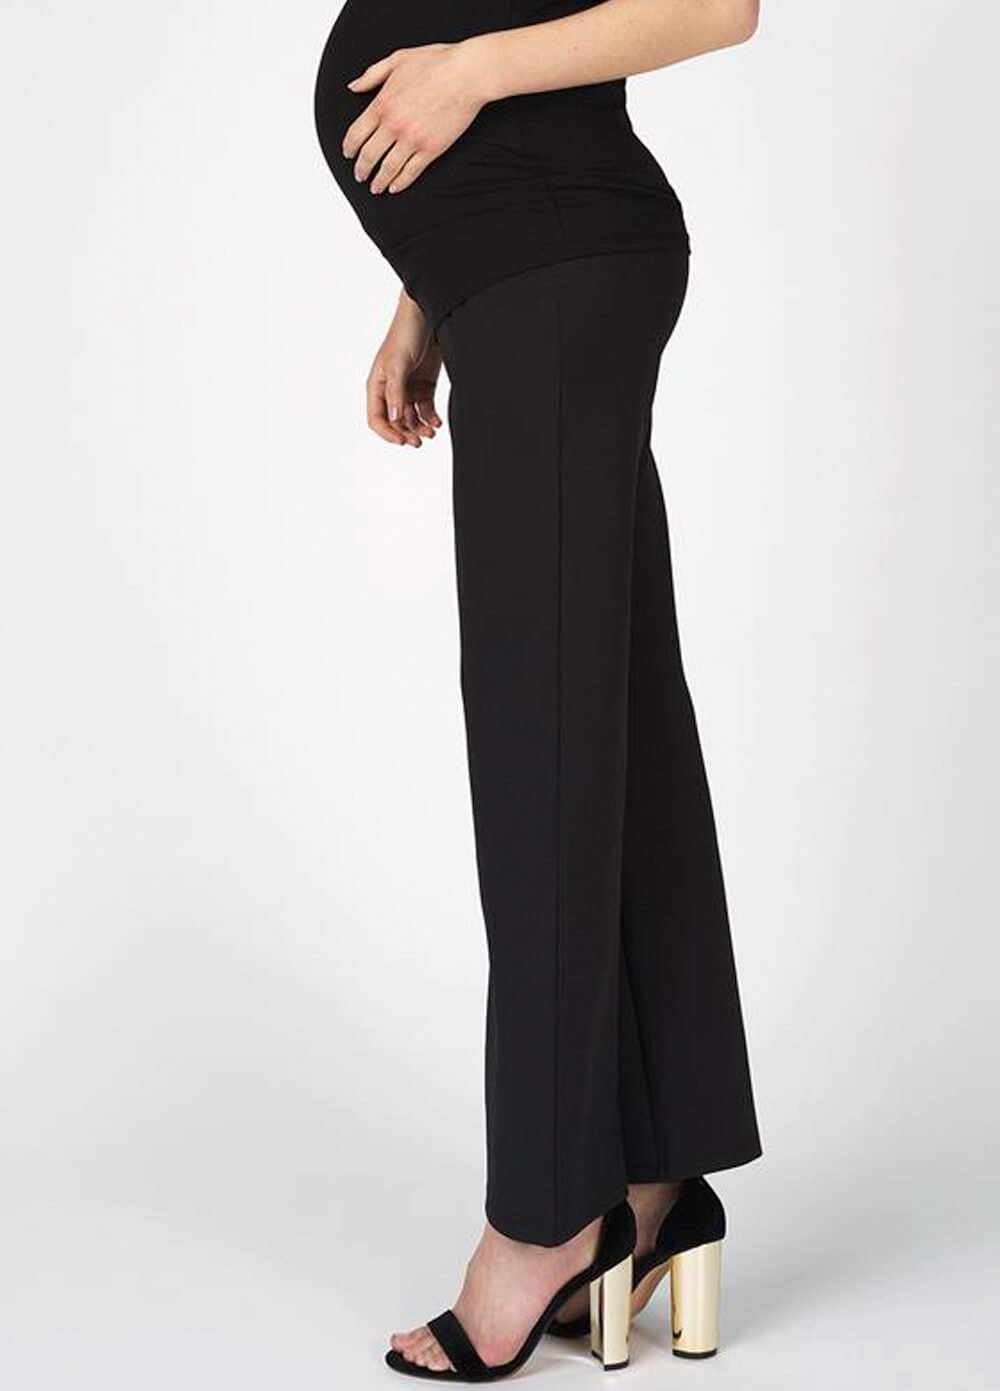 Basic Black Maternity Work Trousers by Supermom | Queen Bee